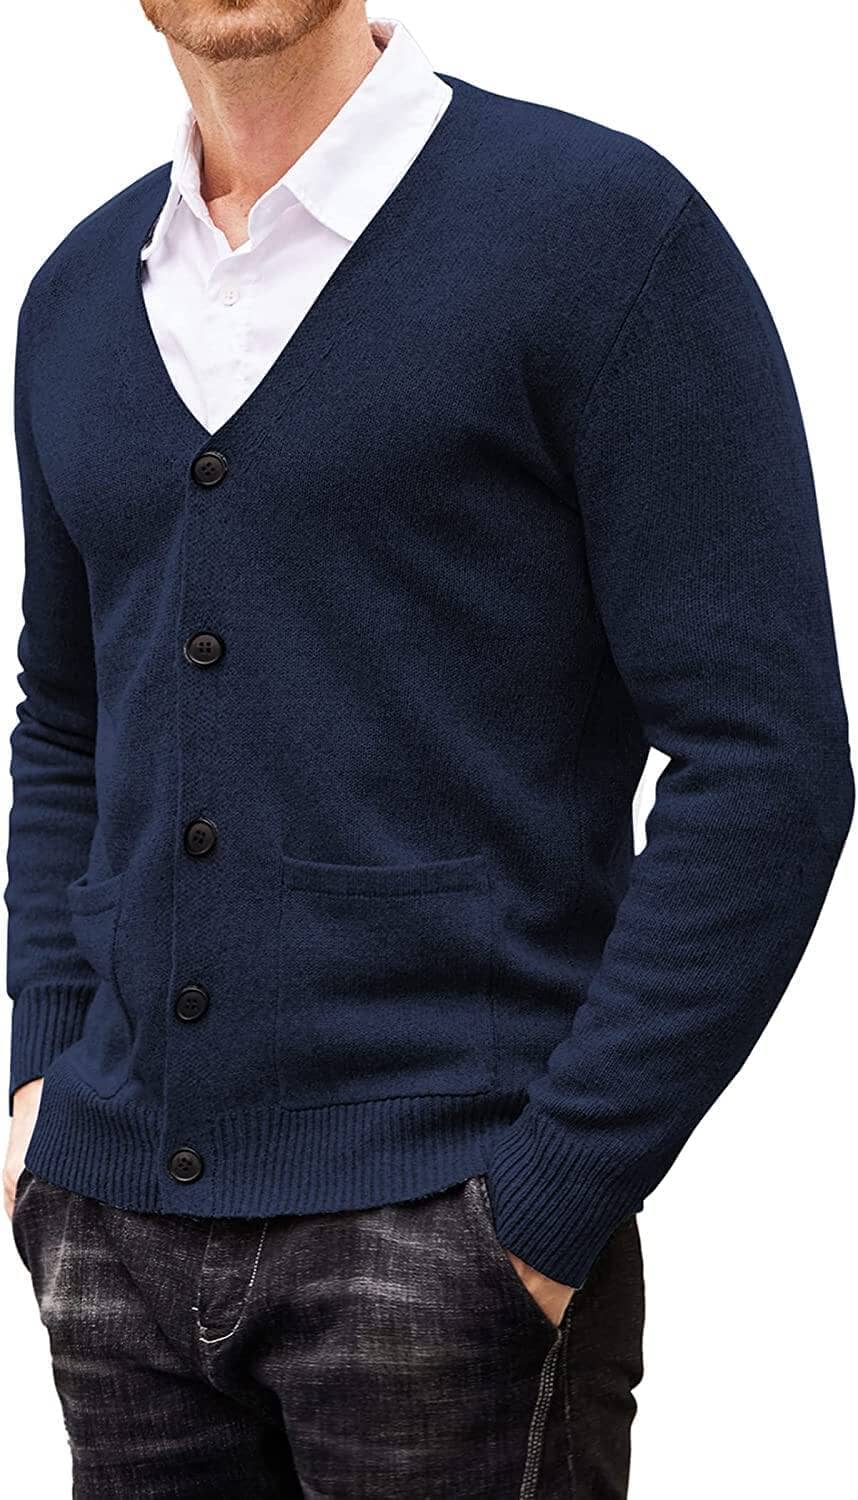 Lightweight V Neck Knitted Sweaters with Pockets (US Only) Sweaters COOFANDY Store Navy Blue S 